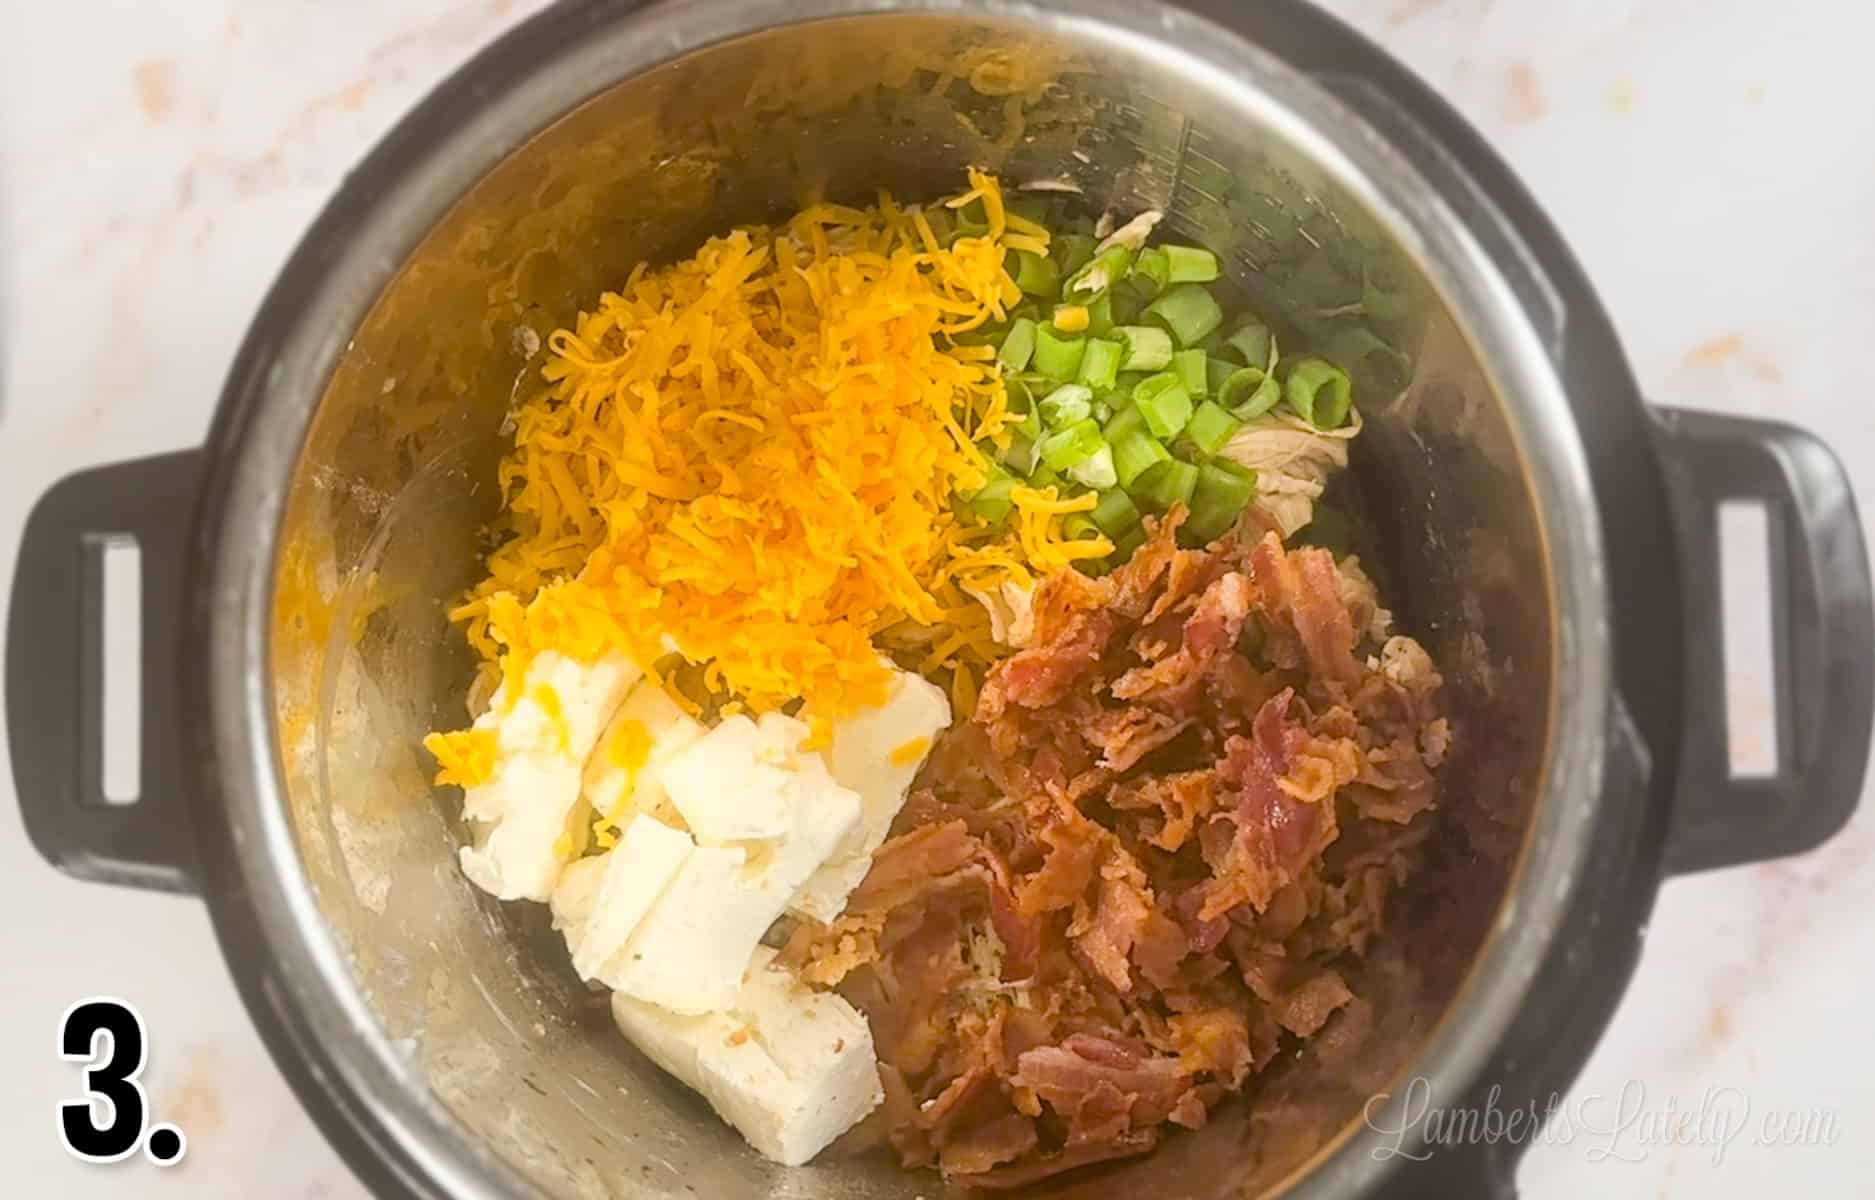 cream cheese, bacon, cheddar, and green onions over chicken in an instant pot.